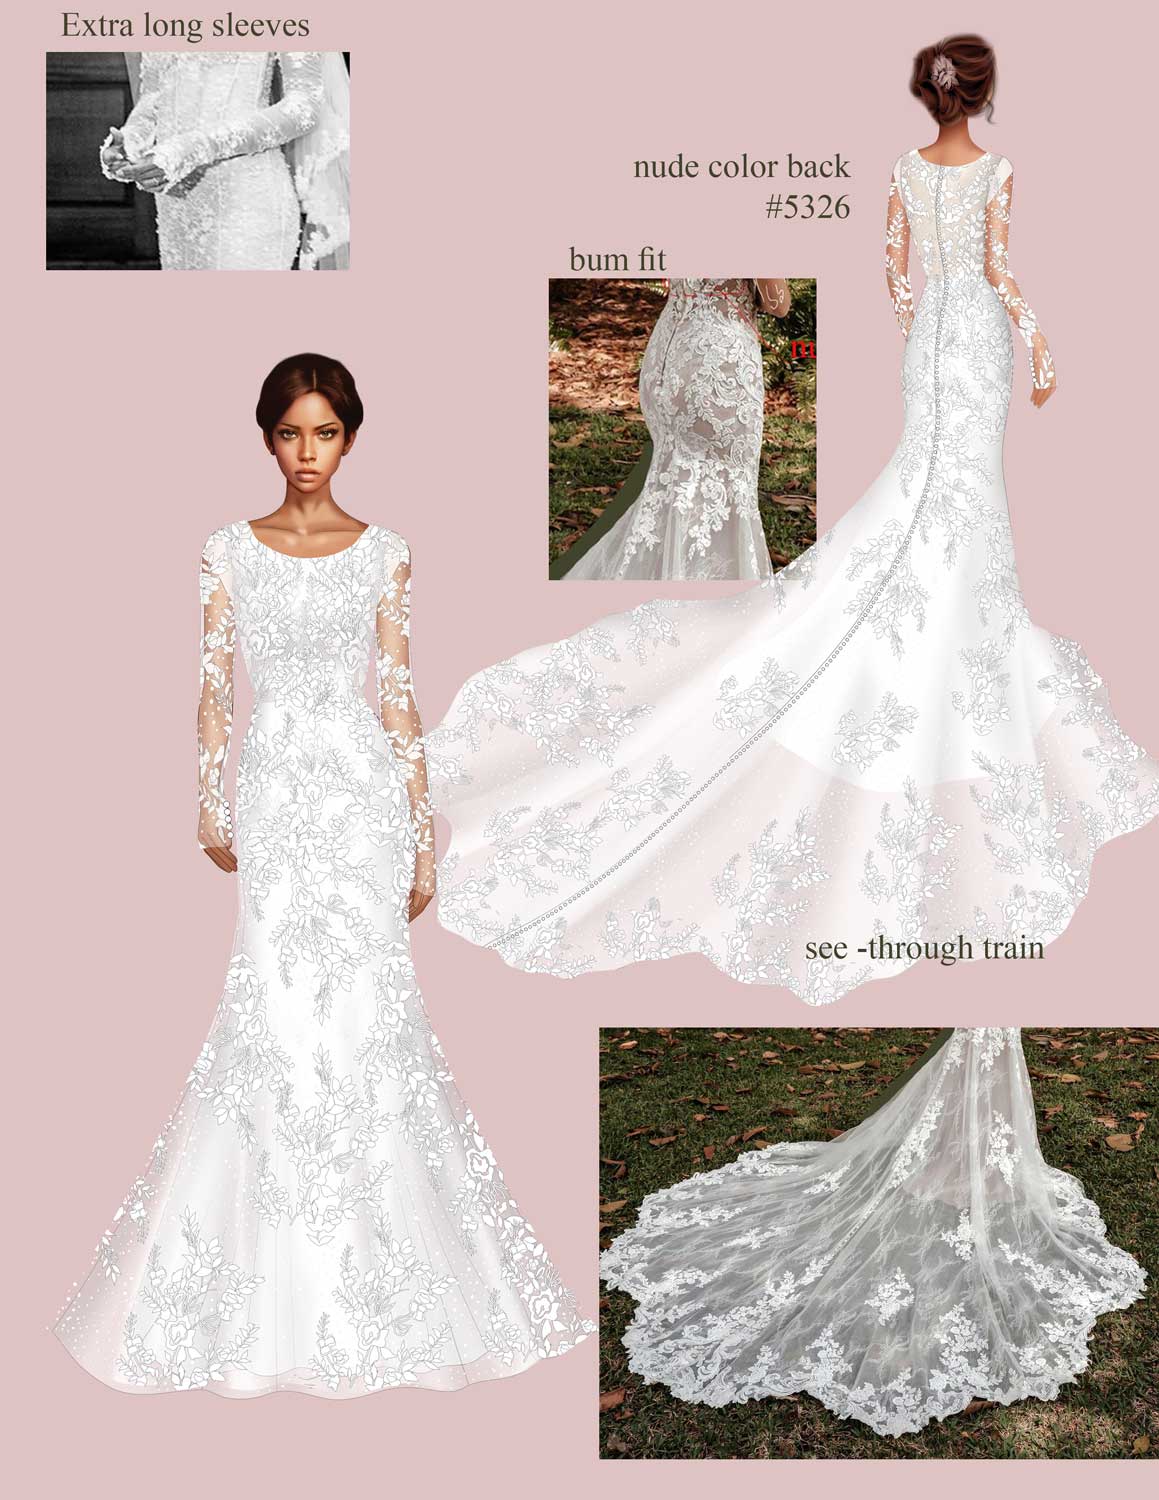 The perfect gift for... - Dreamlines Wedding Dress Sketch | Facebook